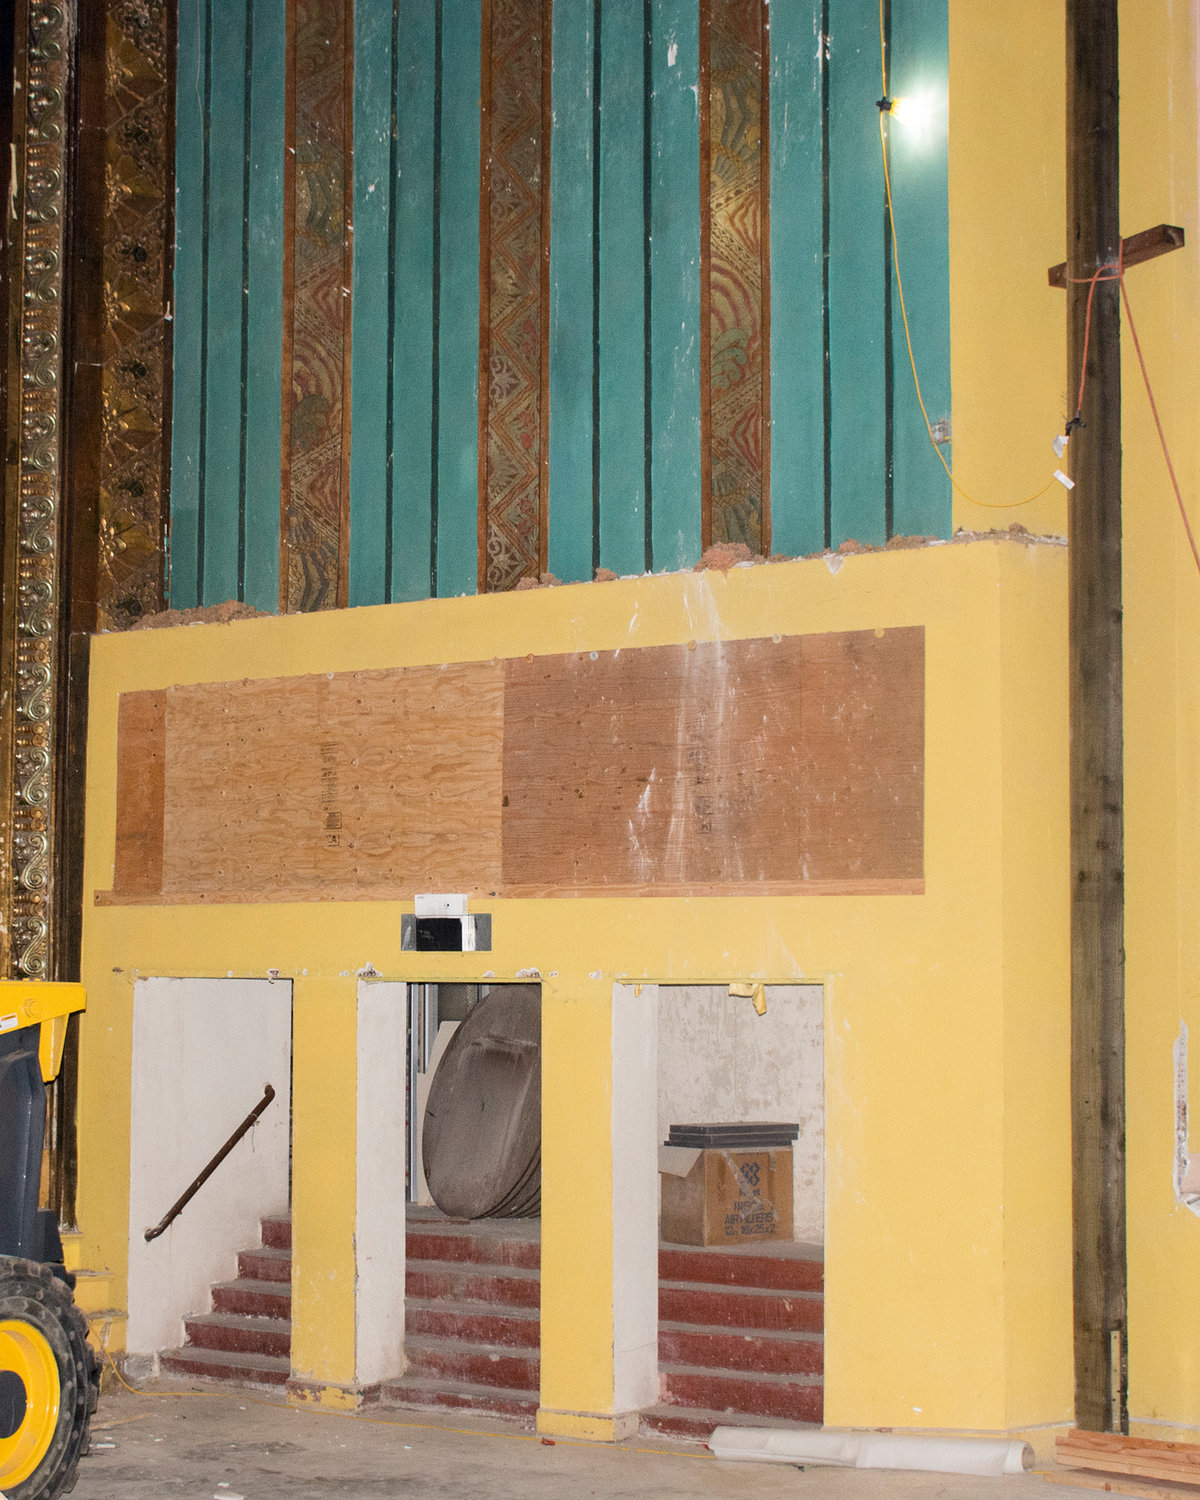 Restoration work continues inside the Fox Theatre in downtown Centralia. Electrical work and ceiling replacement are the projects currently in progress.